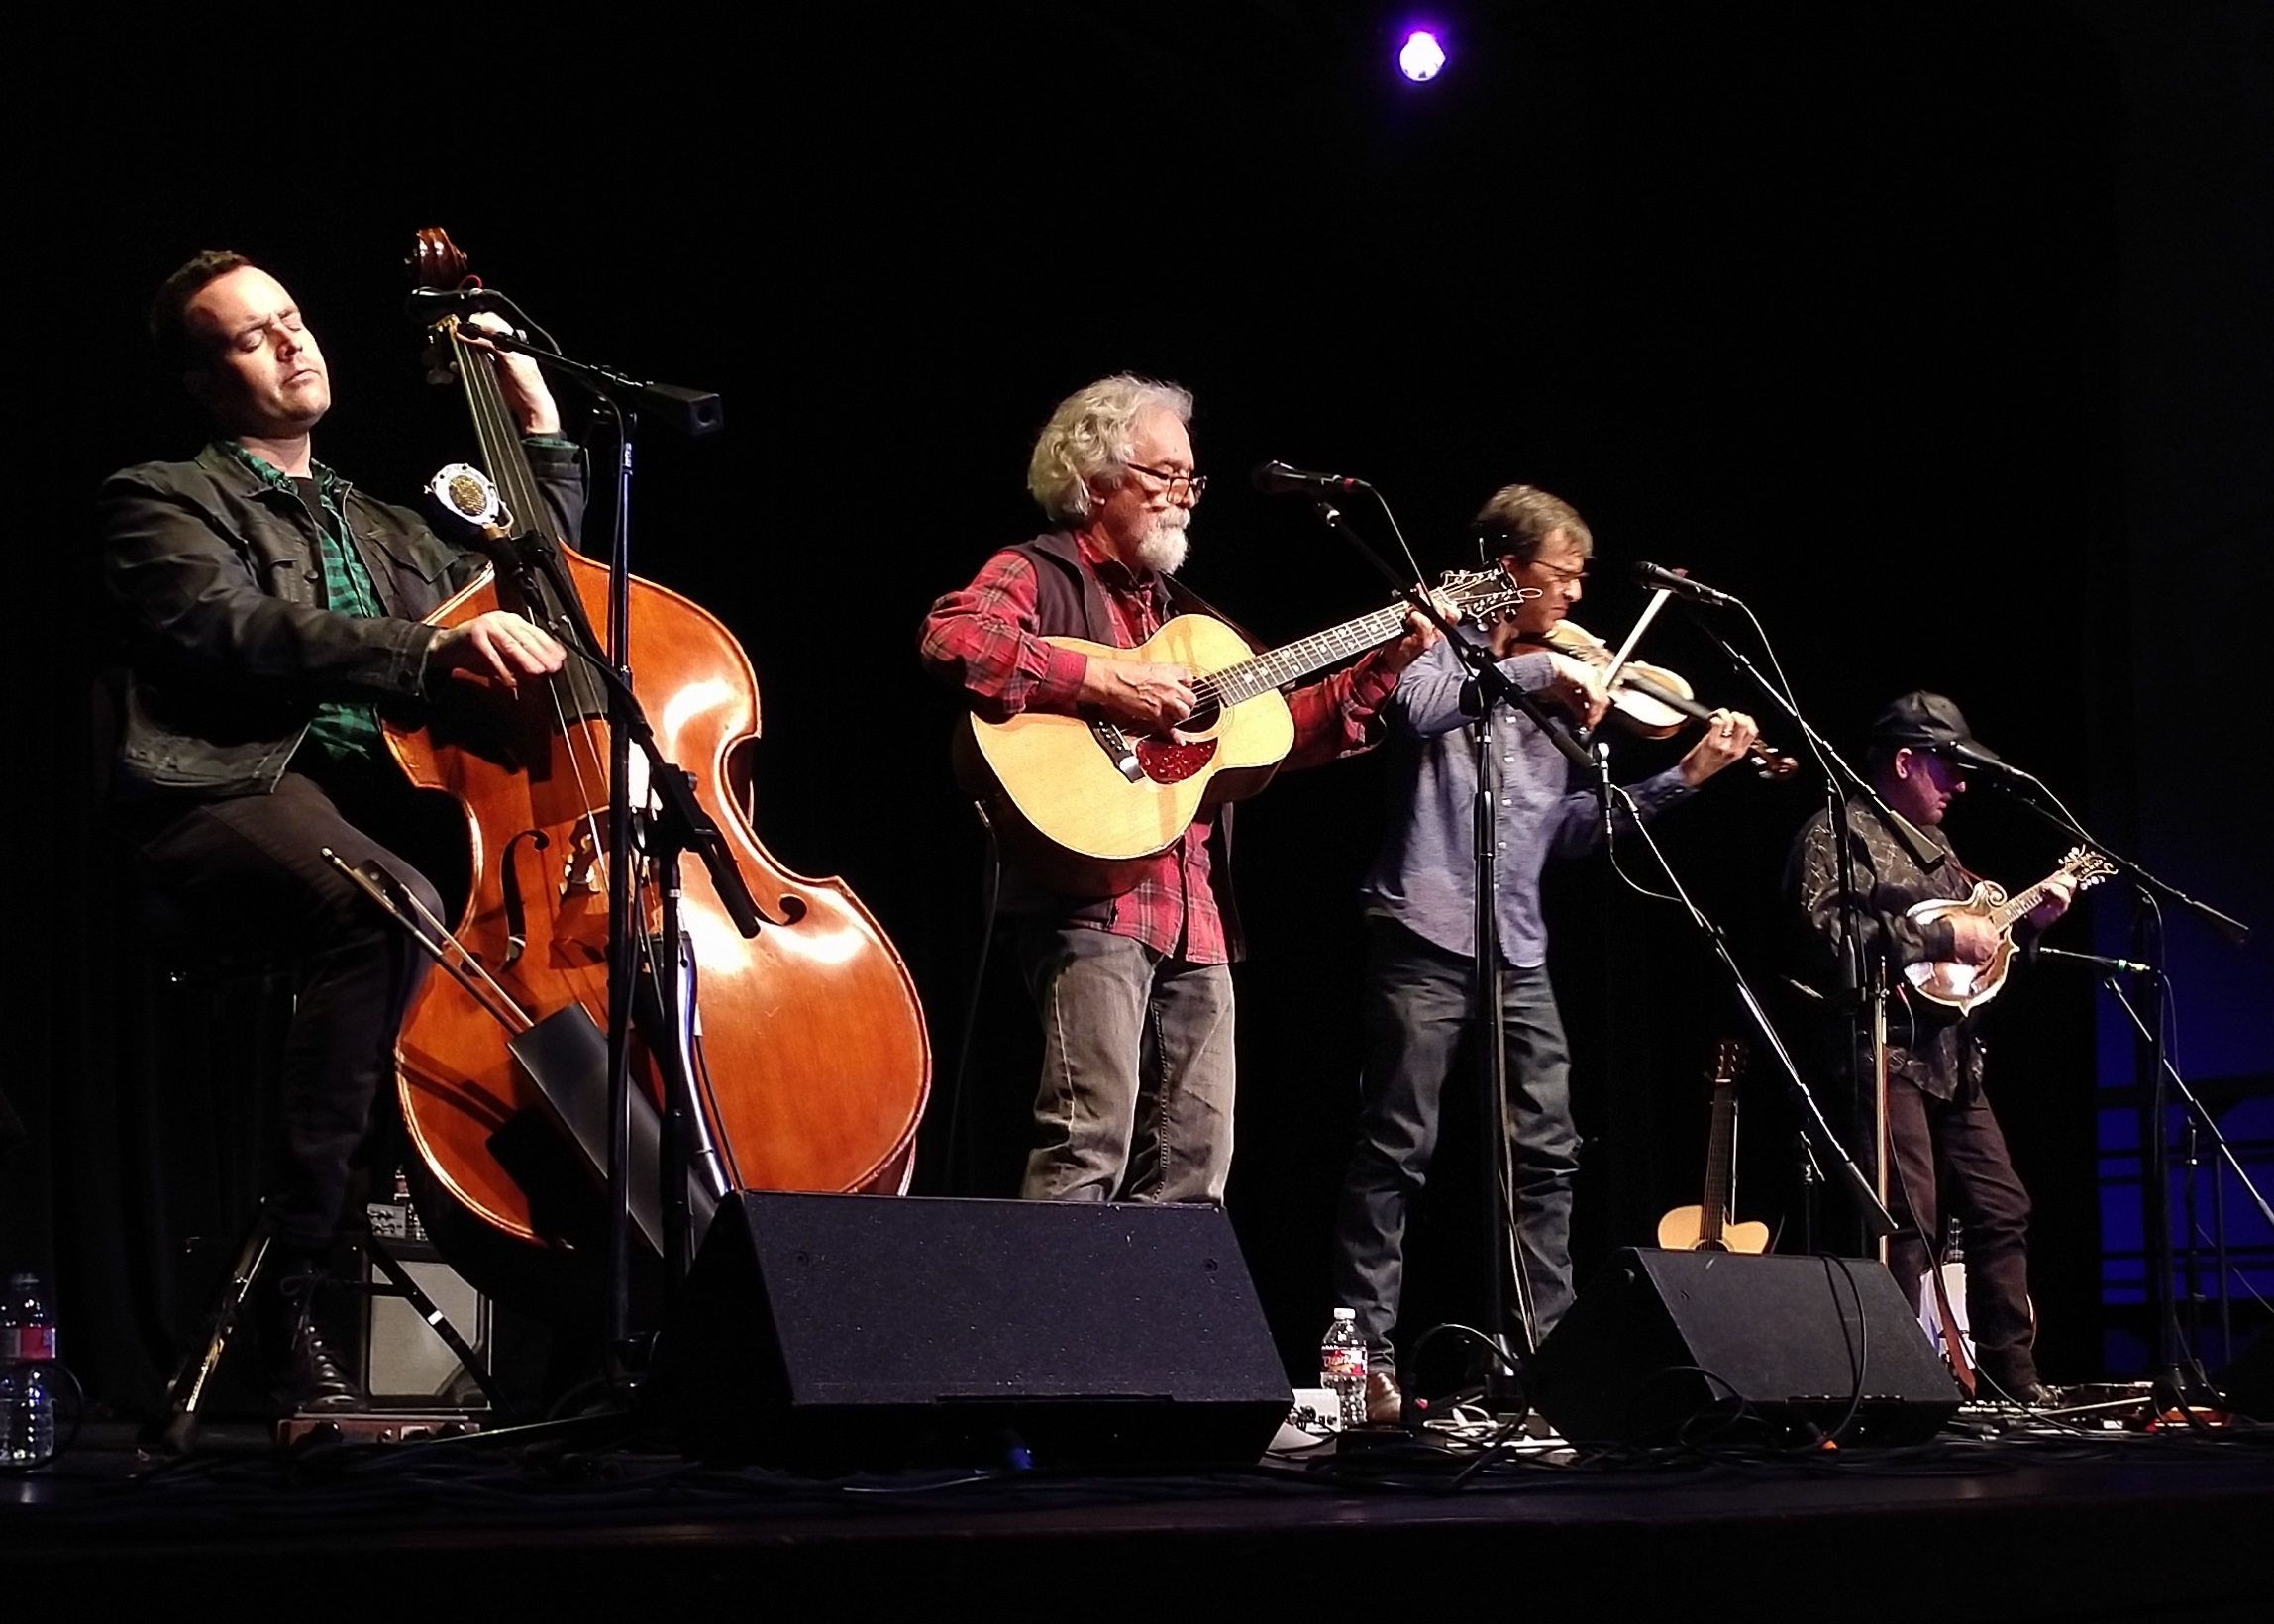 Sgt Pepper's Lonely Bluegrass Band in McKinney Nov 3 2018 (by Alan Tompkins)